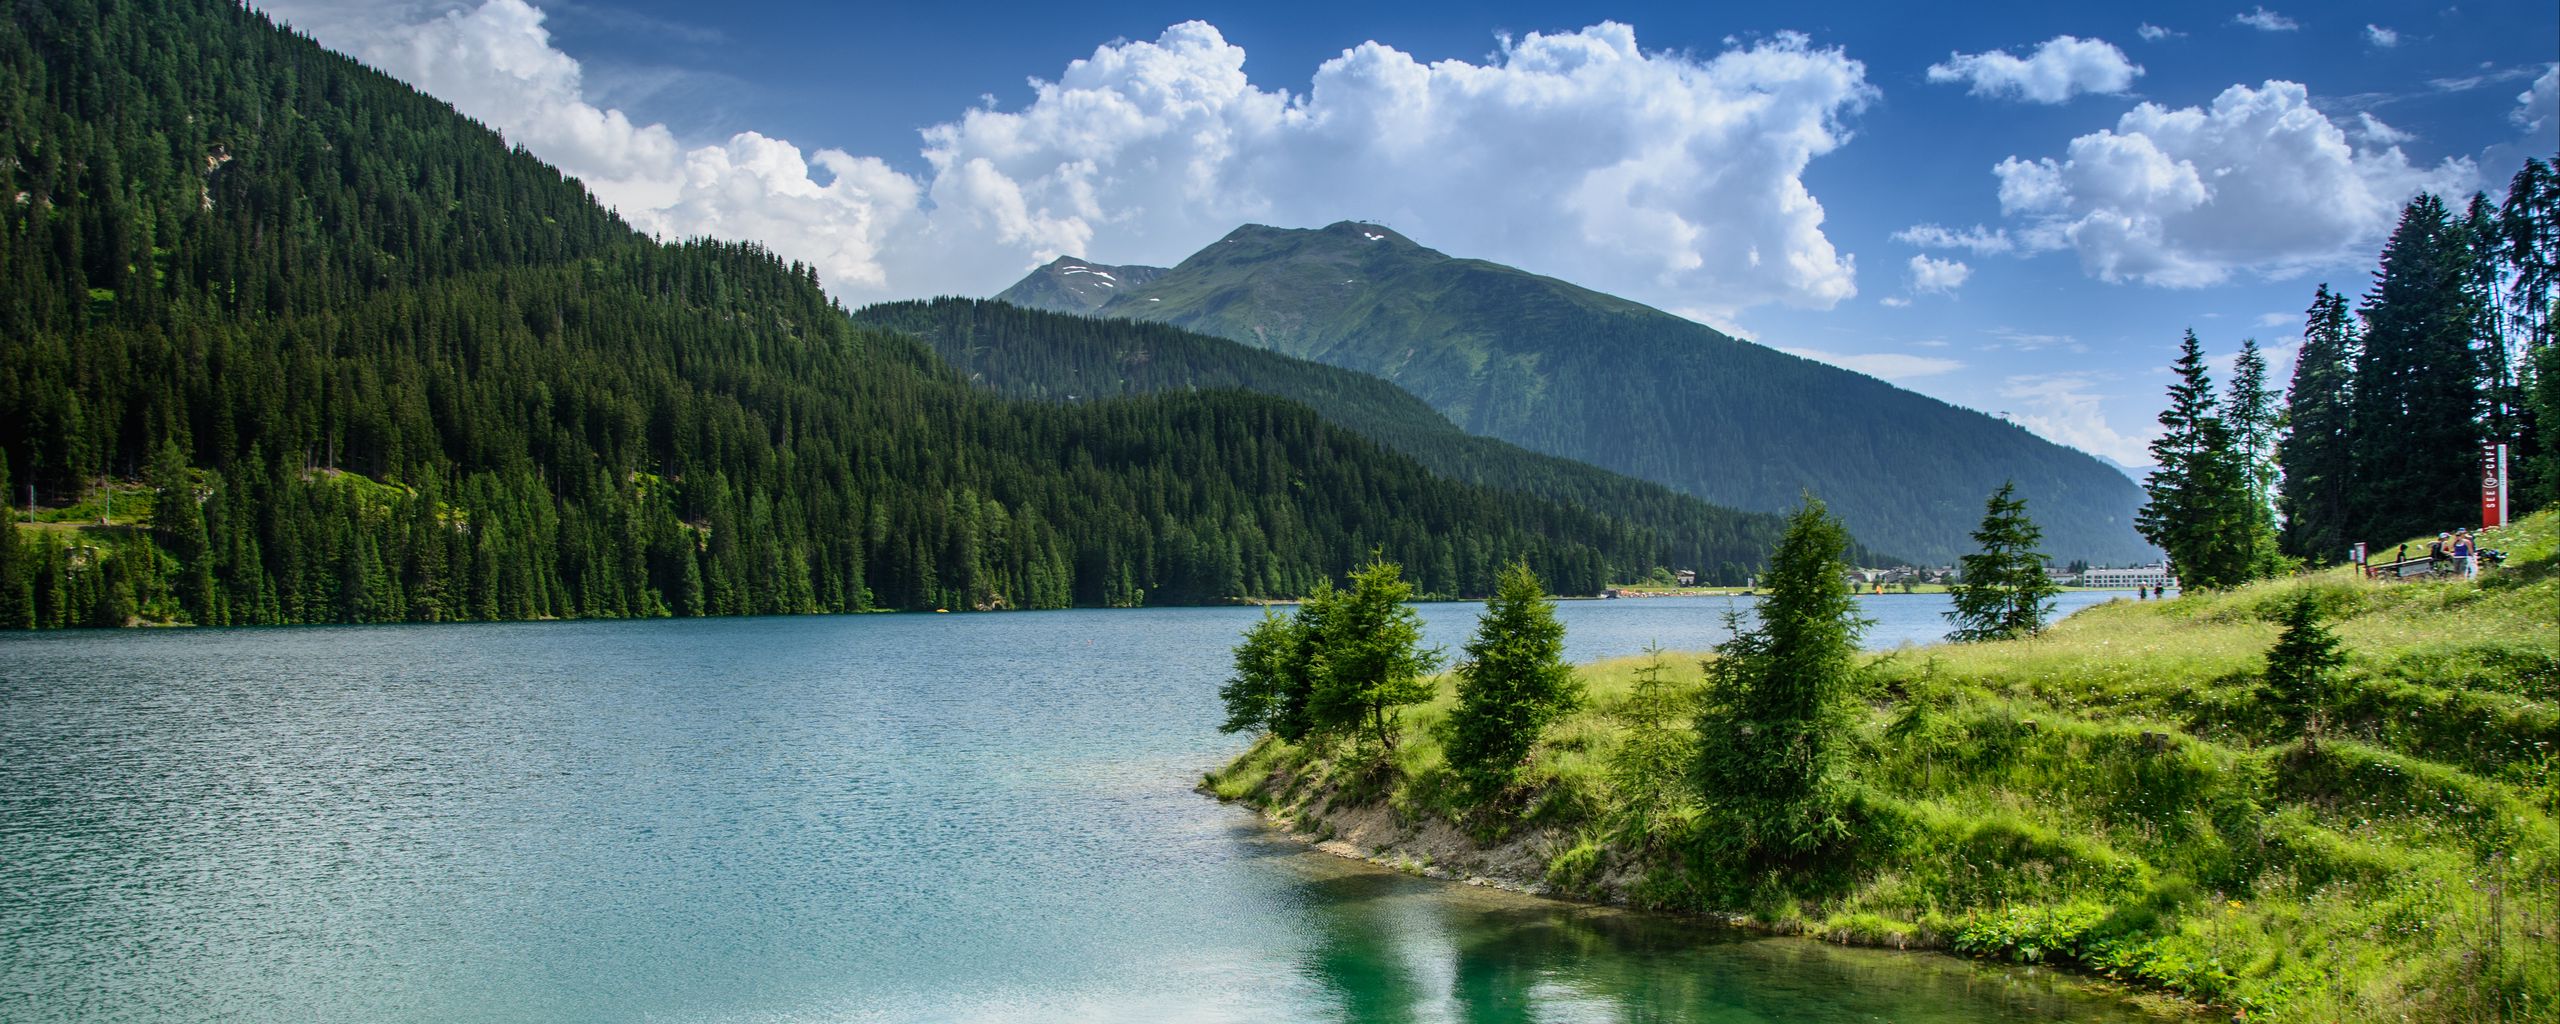 Download wallpaper 2560x1024 nature, lake, mountains, forest ultrawide  monitor hd background